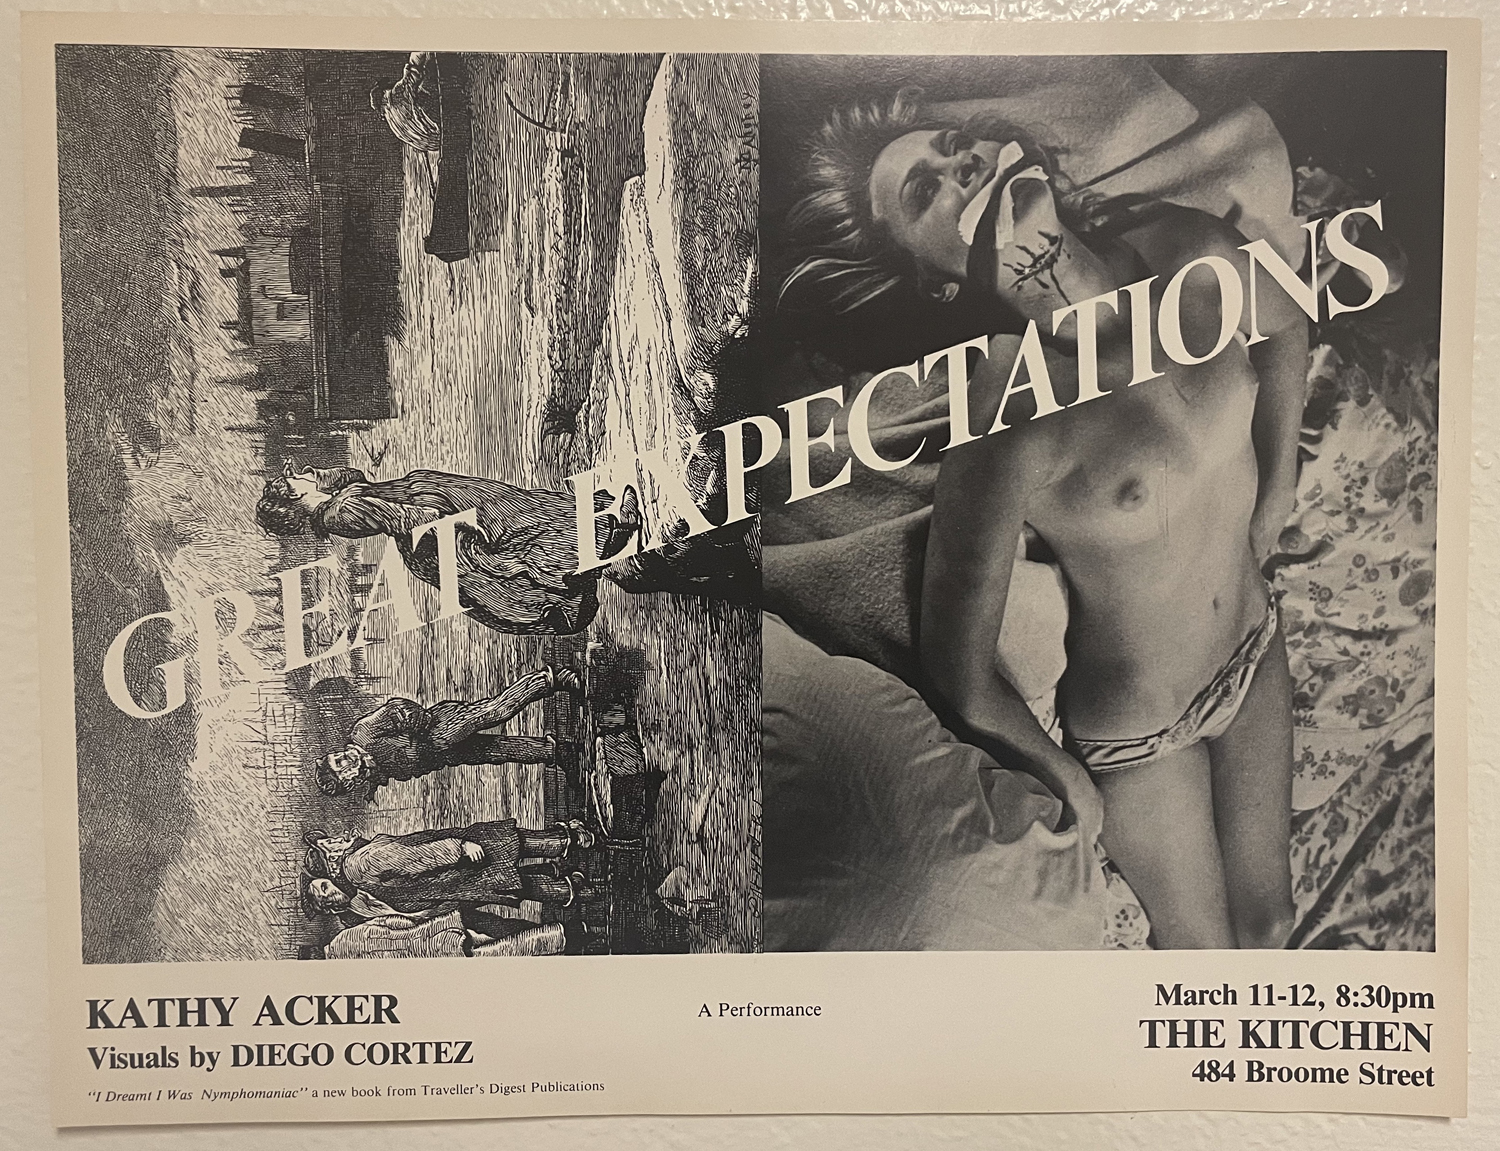 Kathy Acker "Great Expectations" | 1980